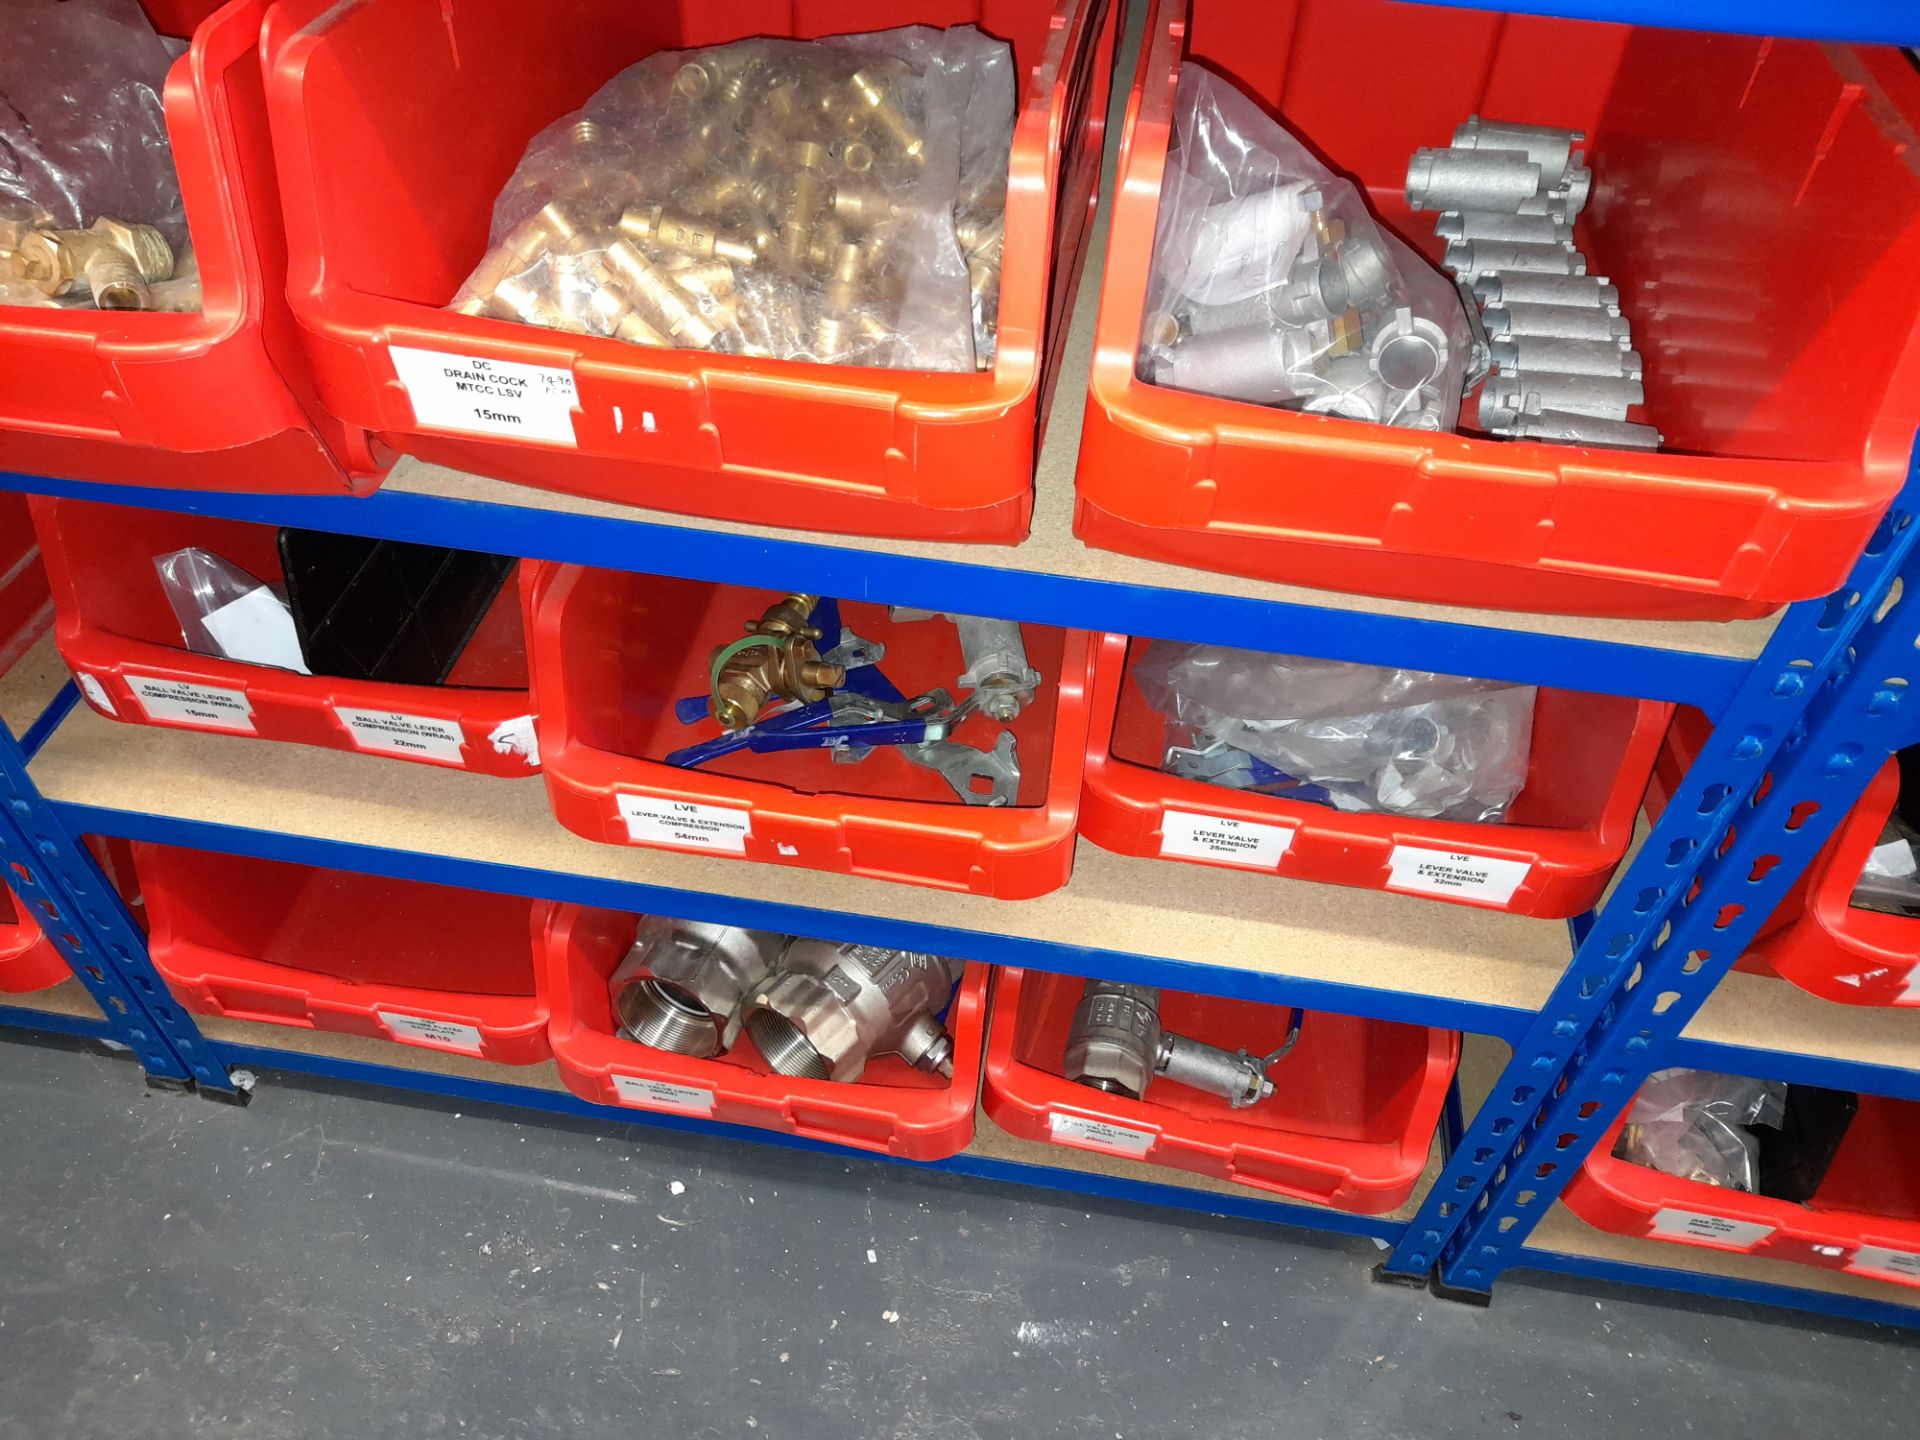 Large Quantity of stock to 2 bays including ball valve levers, (various sizes), stop cock taps ( - Image 11 of 11